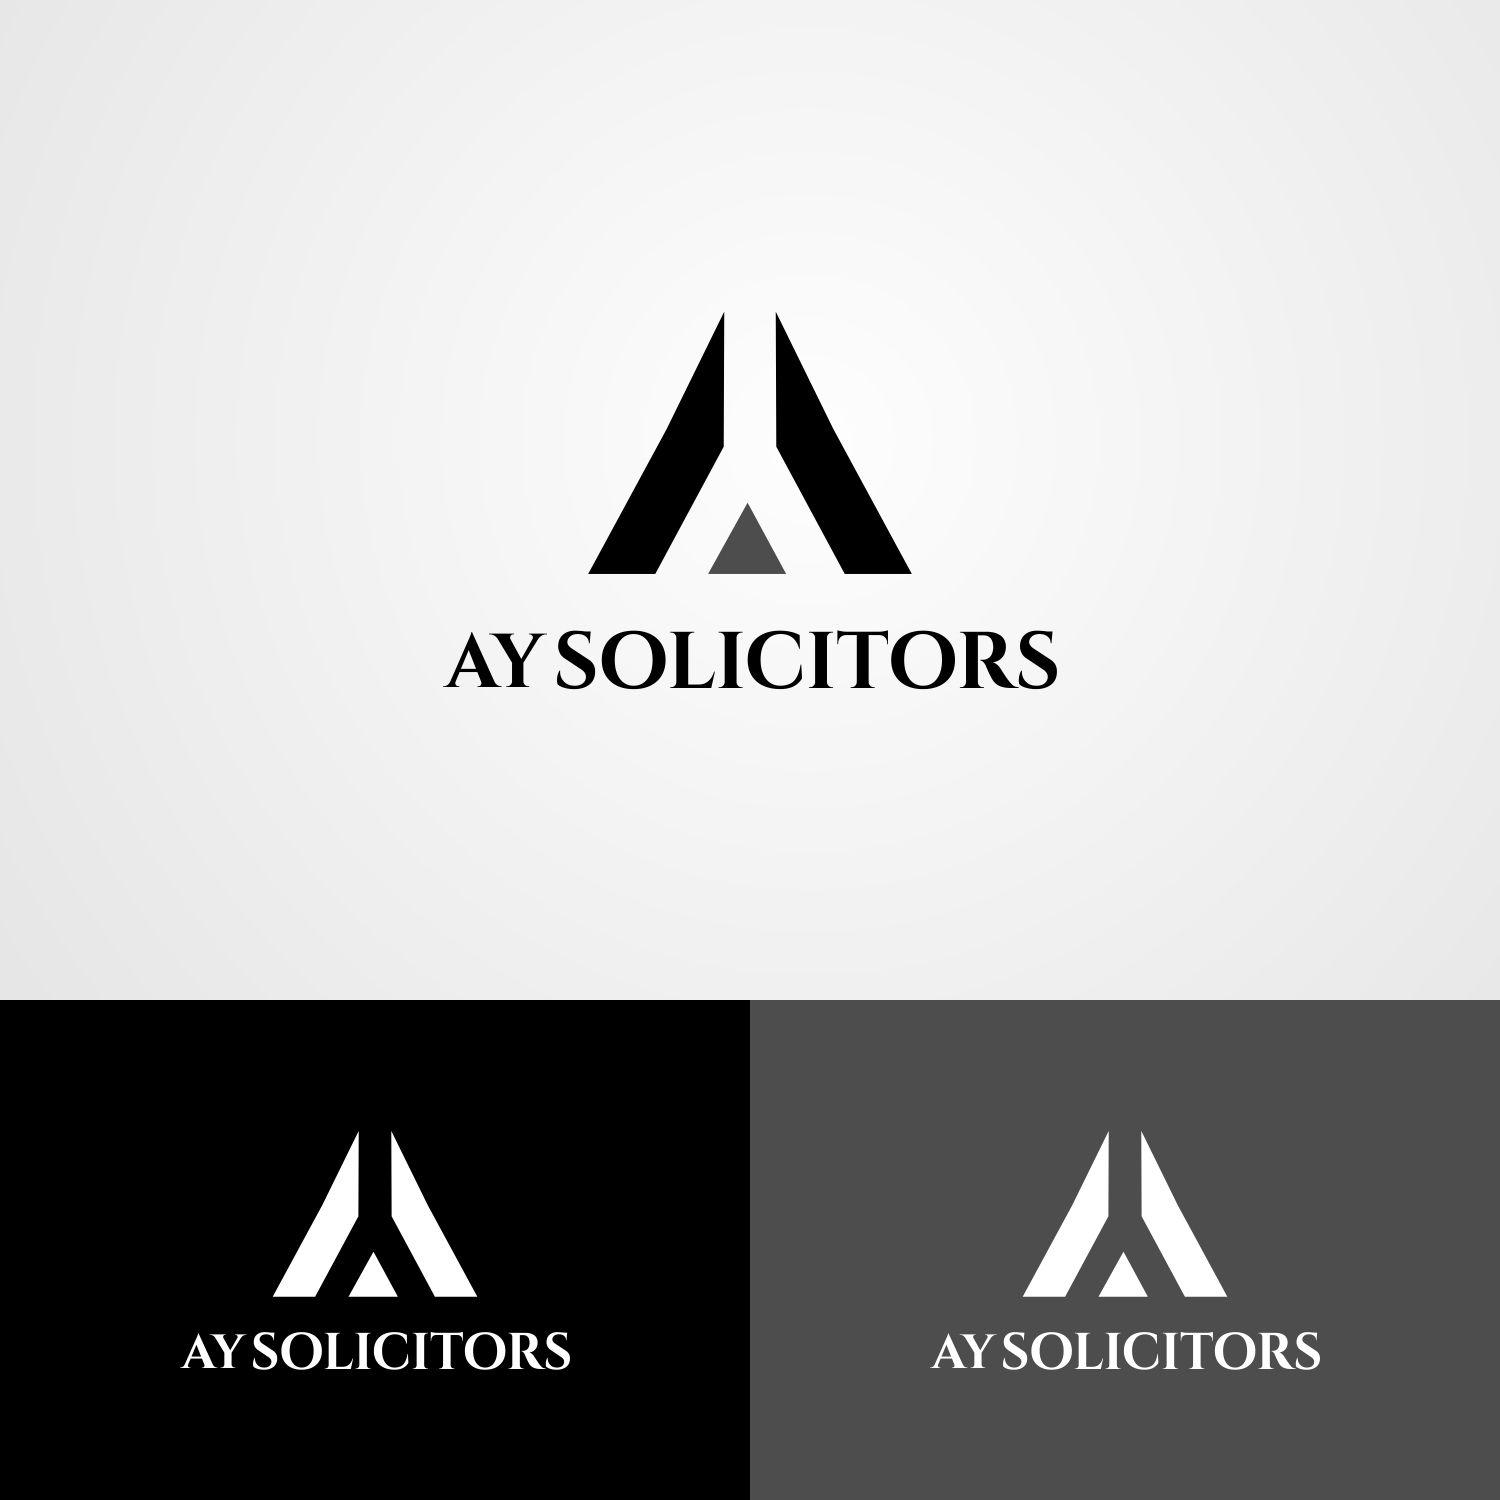 Ay Logo - Serious, Professional, Law Firm Logo Design for AY